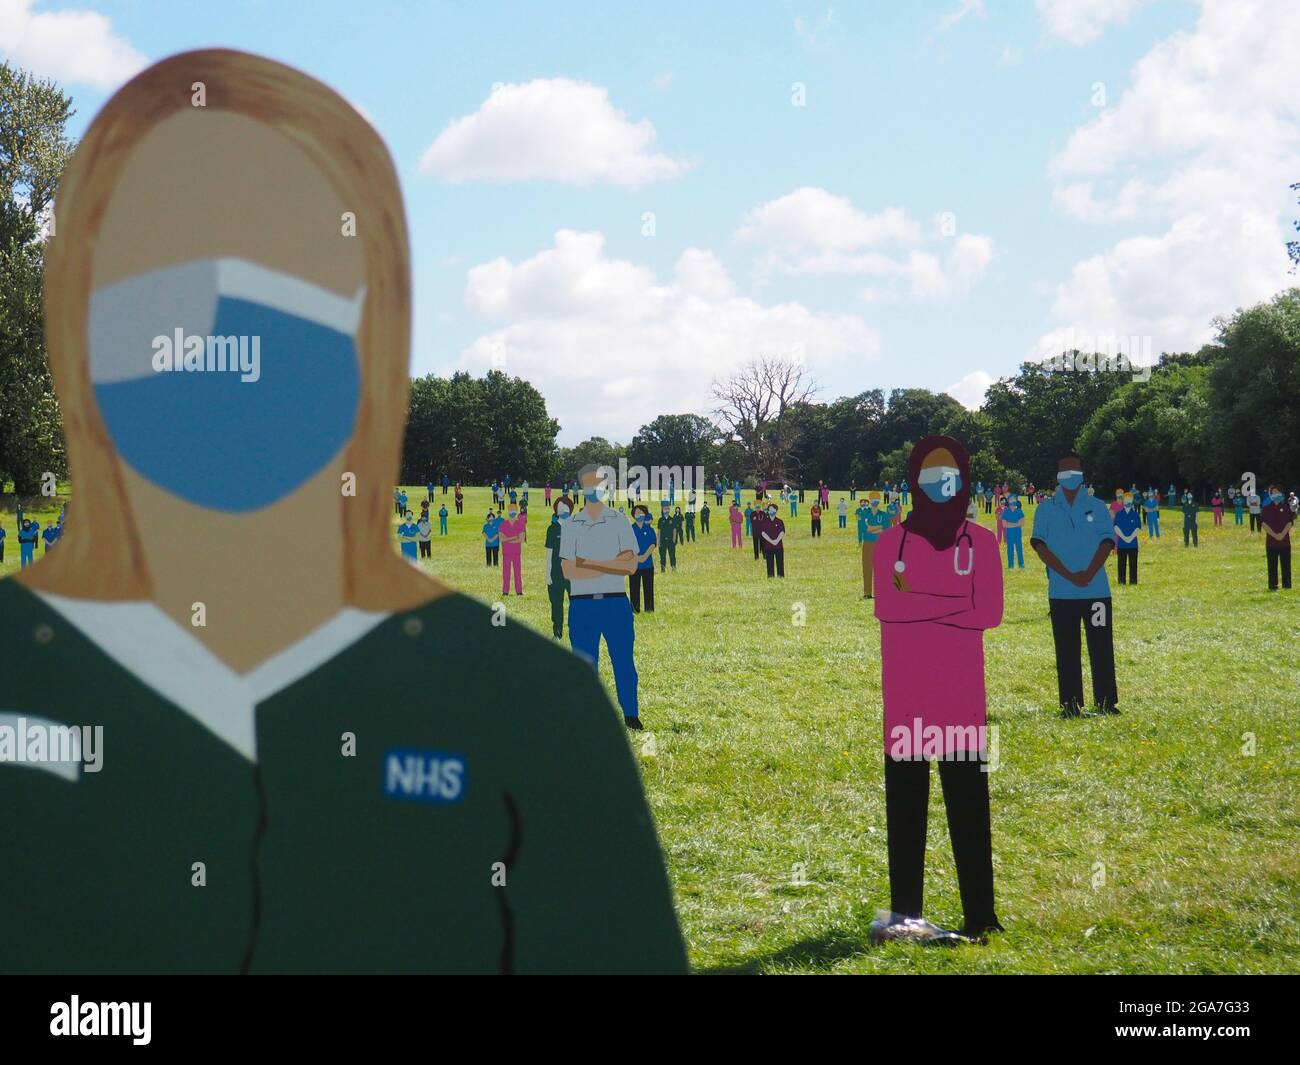 Oxford, UK. 29th July 2021. The Standing with Giants community art installation in South Park in tribute to the NHS workers who lost their lives while fighting Covid-19. Credit: Angela Swann/Alamy Live News Stock Photo